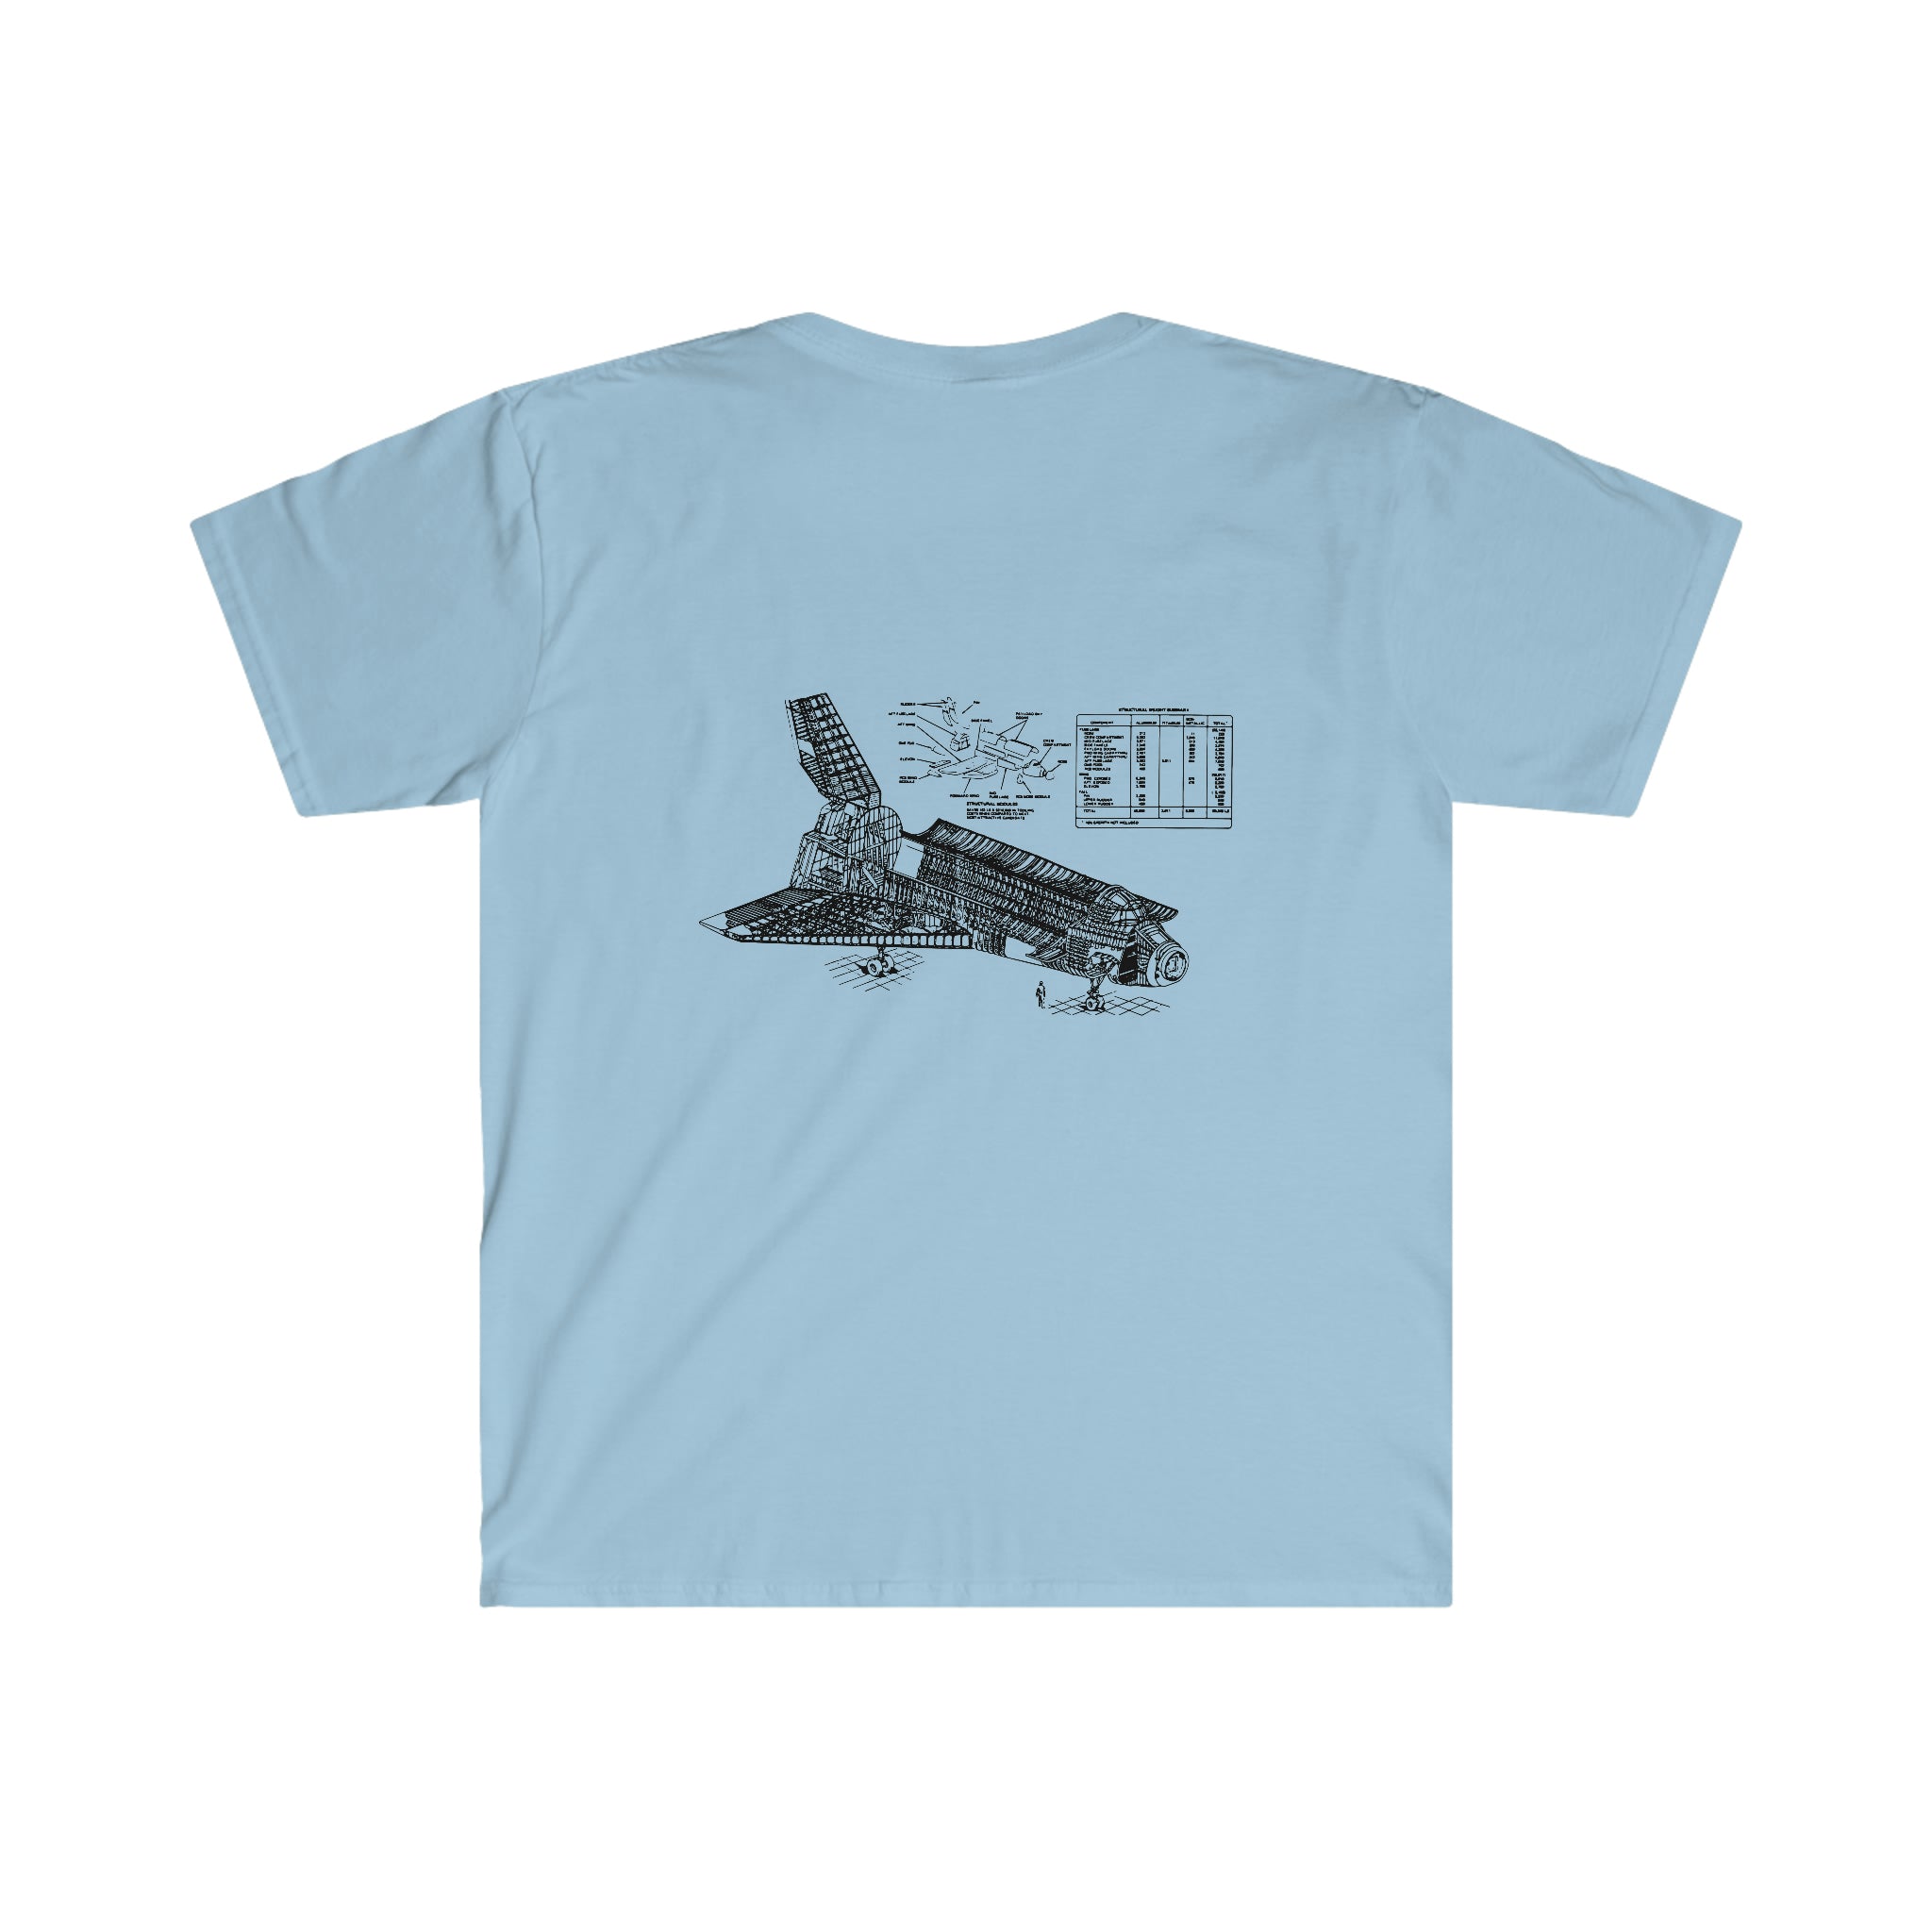 A blue Space is my goal T-Shirt with a drawing of a plane on it.